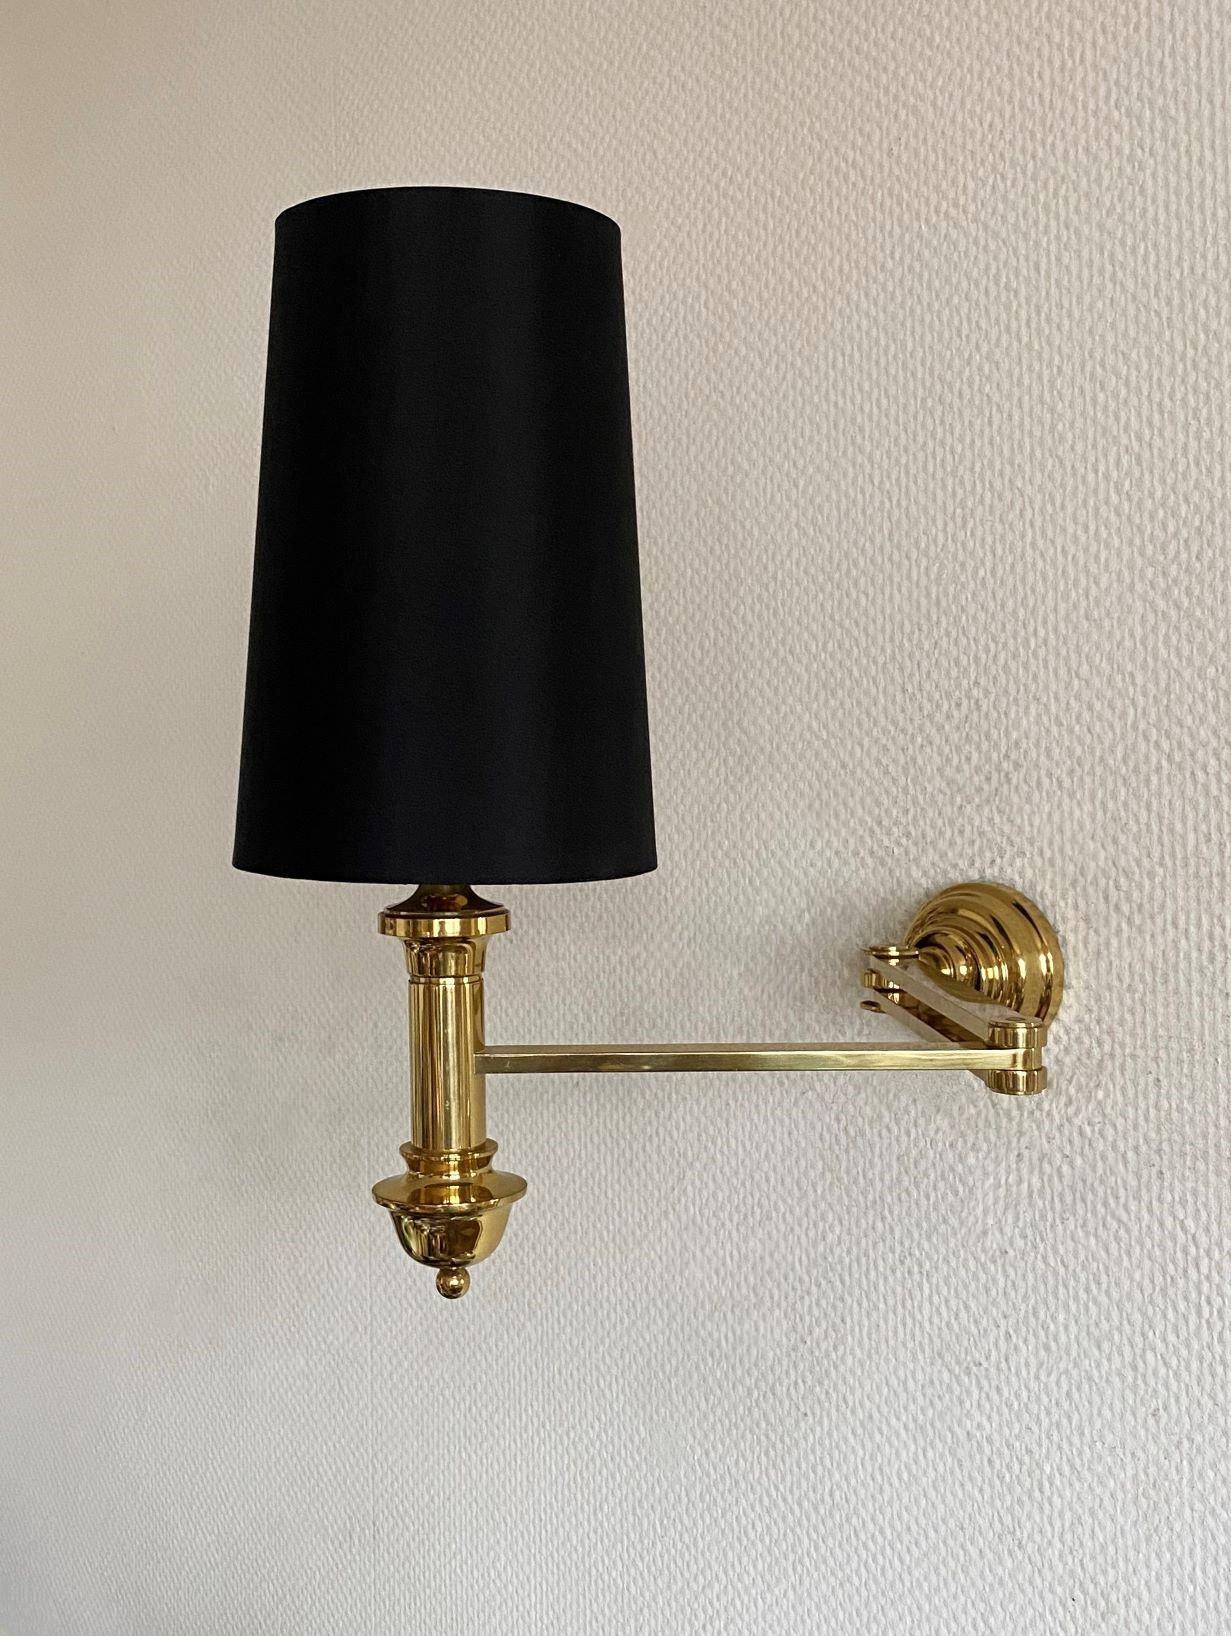 Pair of Maison Jansen Style Brass Swing Arm Wall Sconces Lights, 1960s For Sale 2